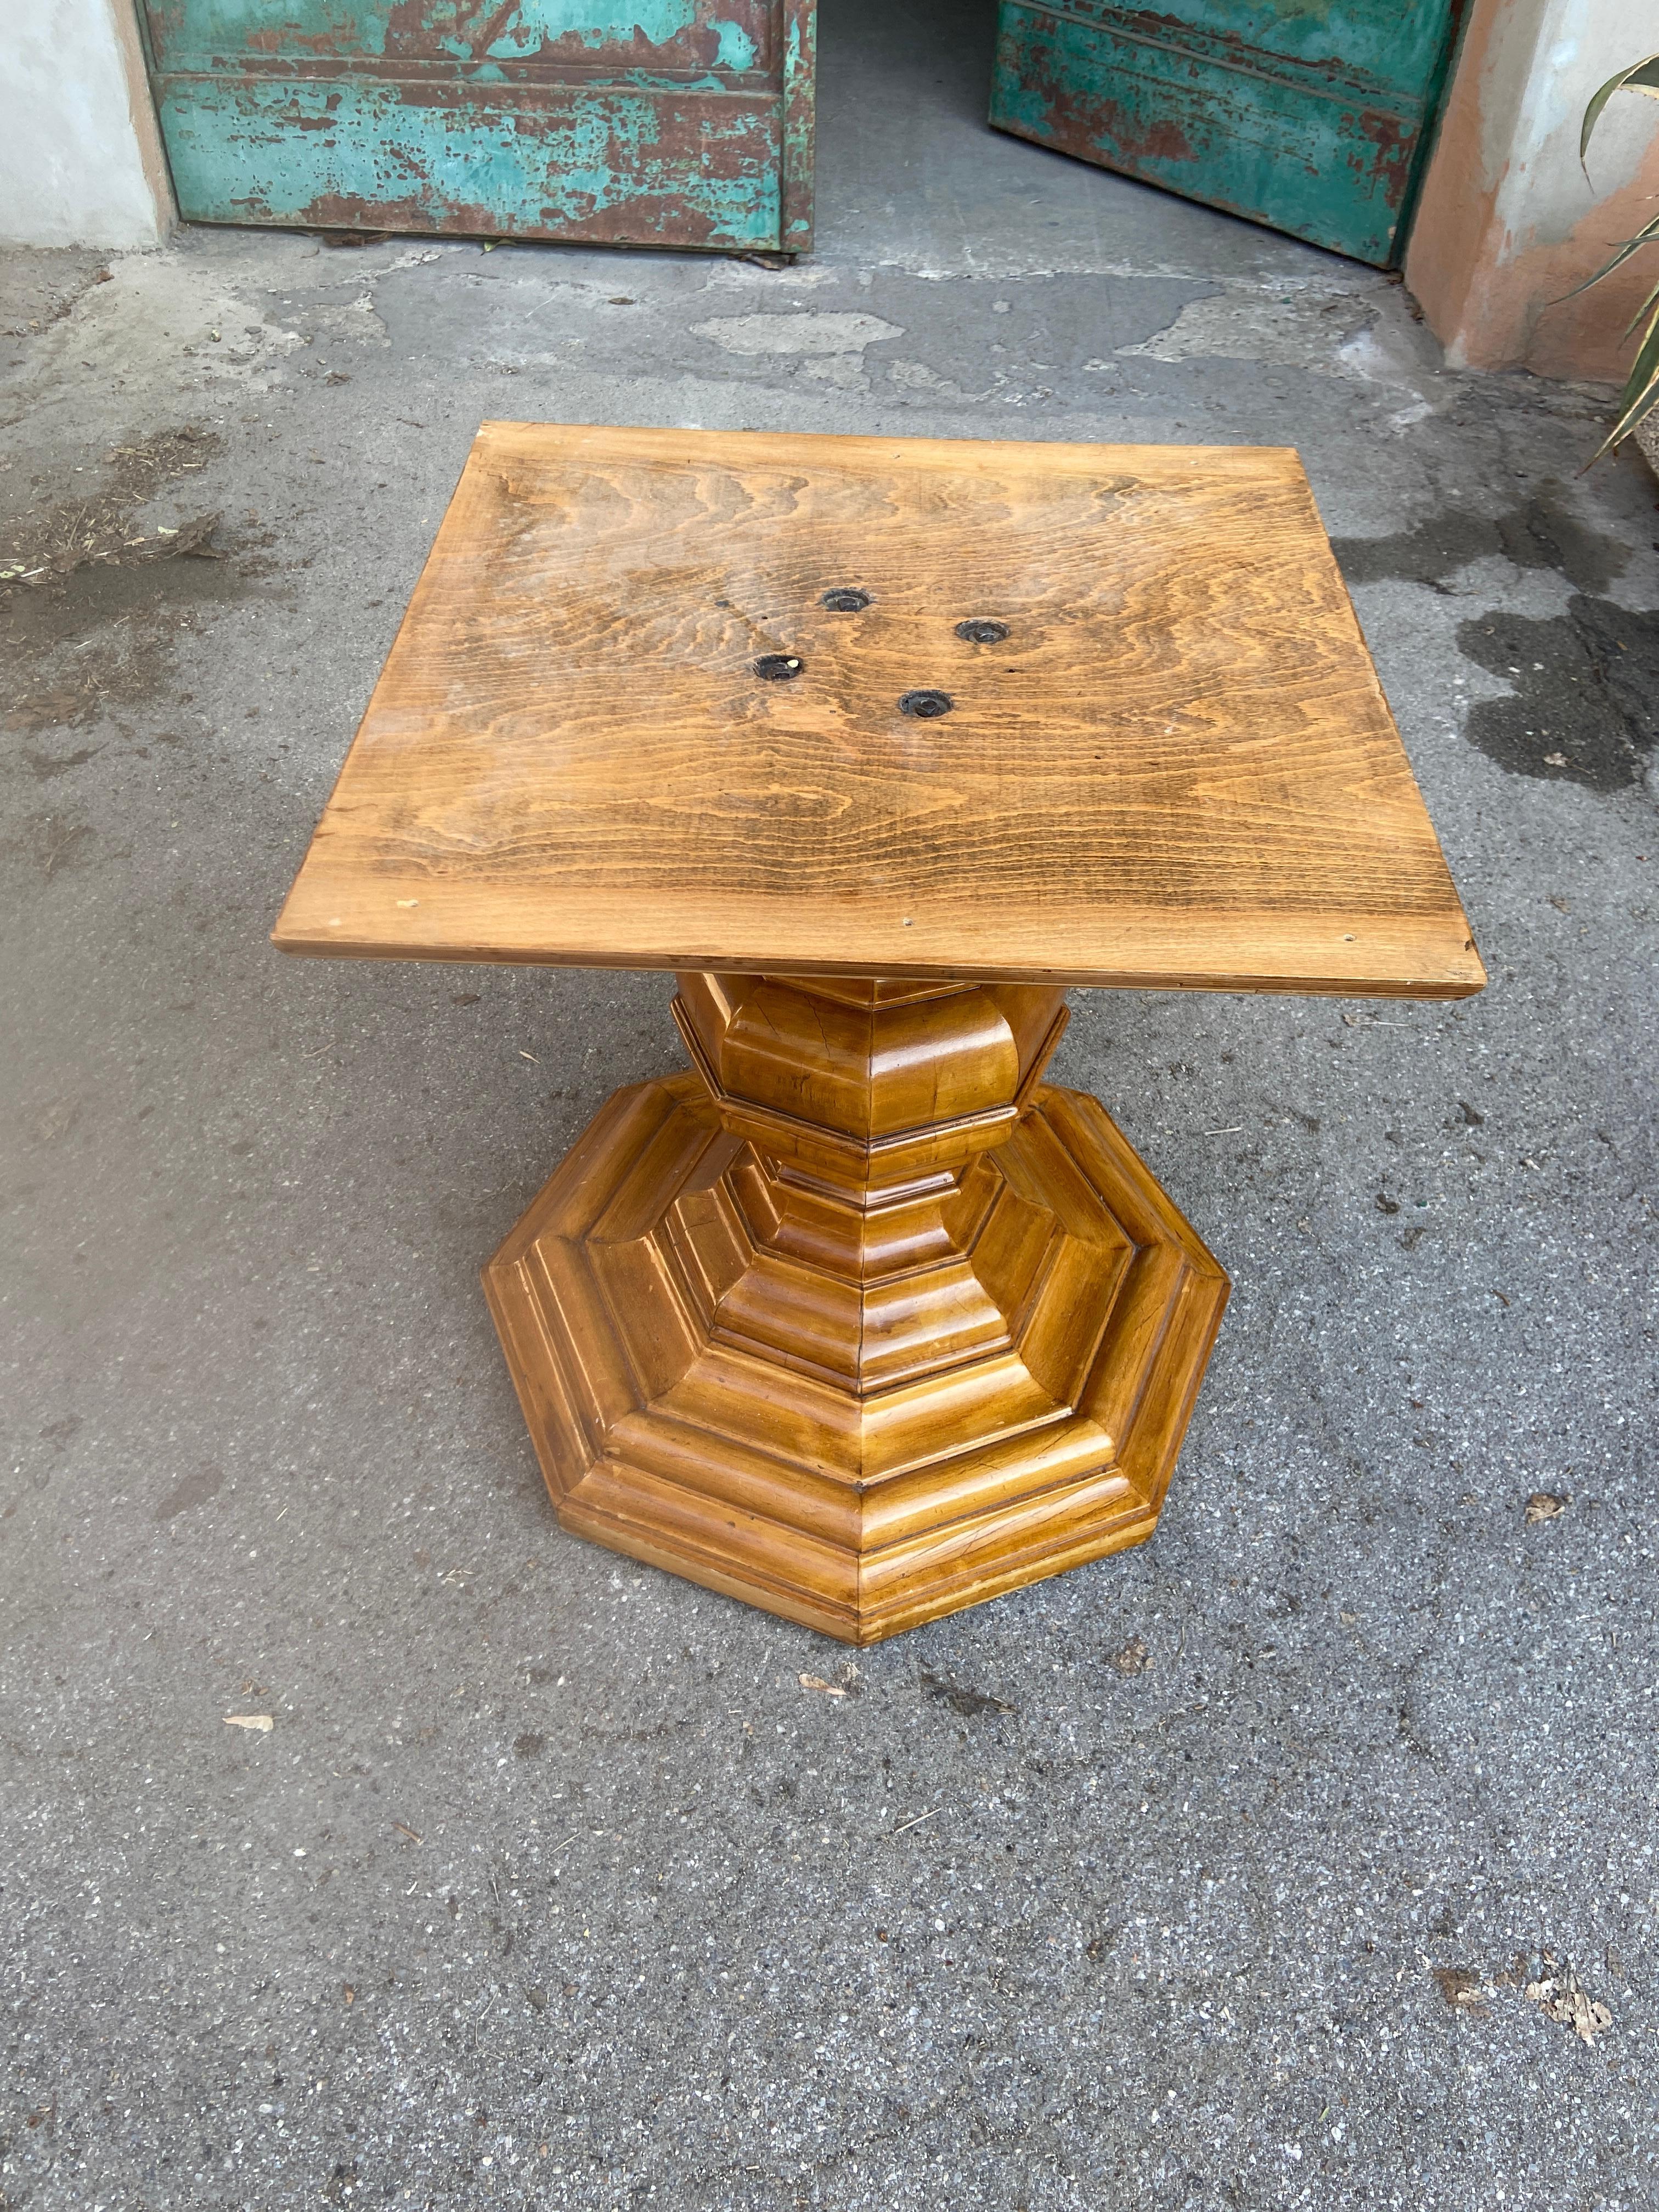 19th Century Italian Octagonal Adjustable Table with Shaped Wooden Leg For Sale 8